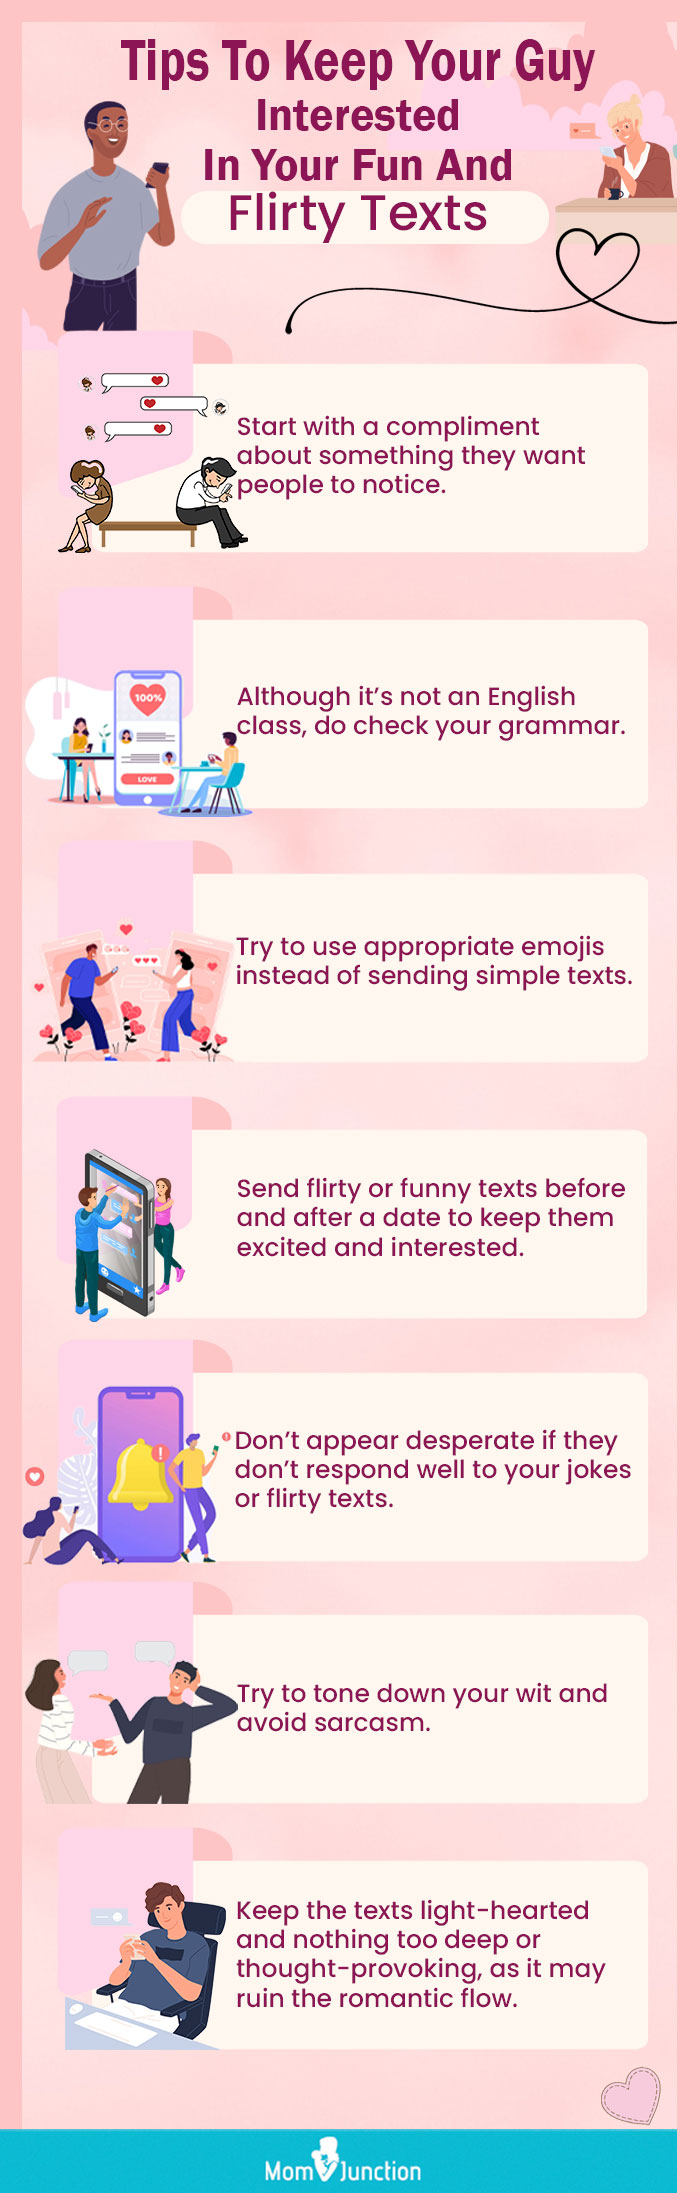 250+ Fun And Flirty Questions To Ask A Guy Over Text